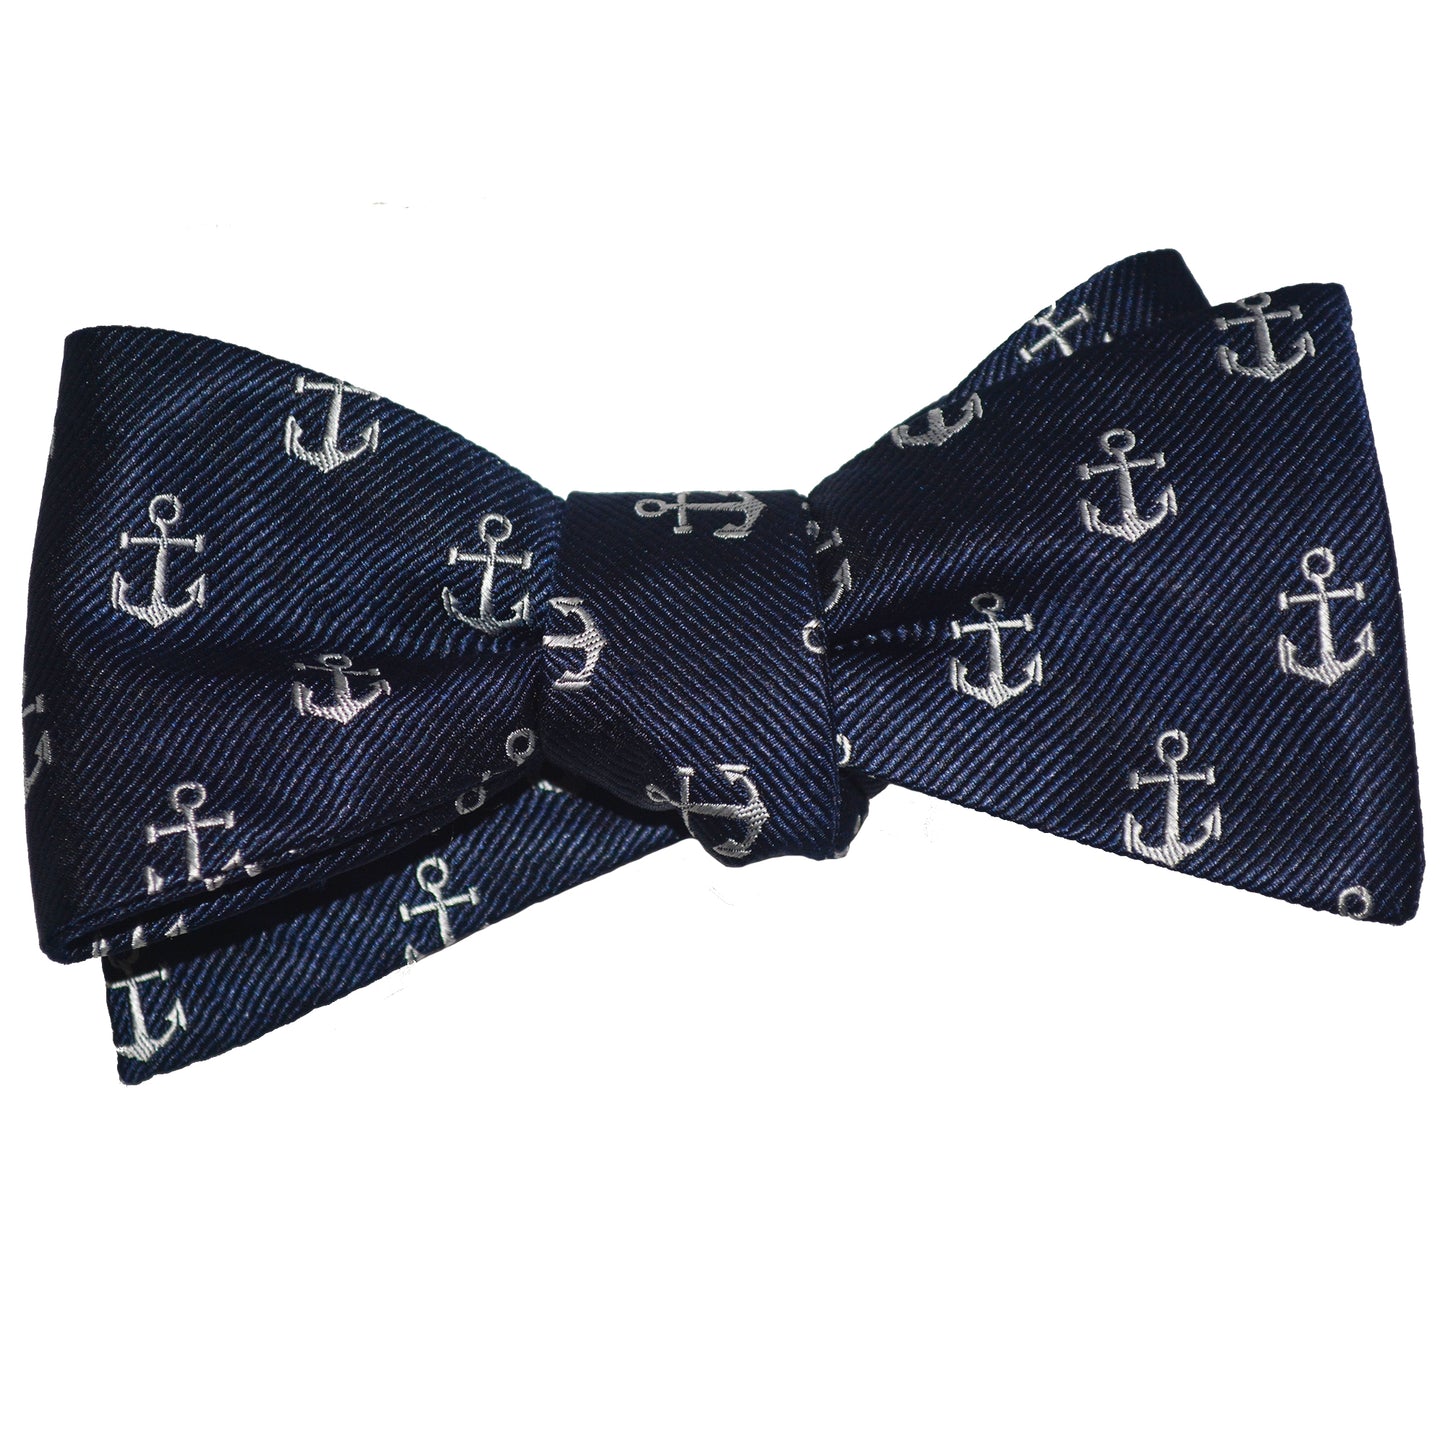 Anchor Bow Tie - White on Navy, Woven Silk - SummerTies